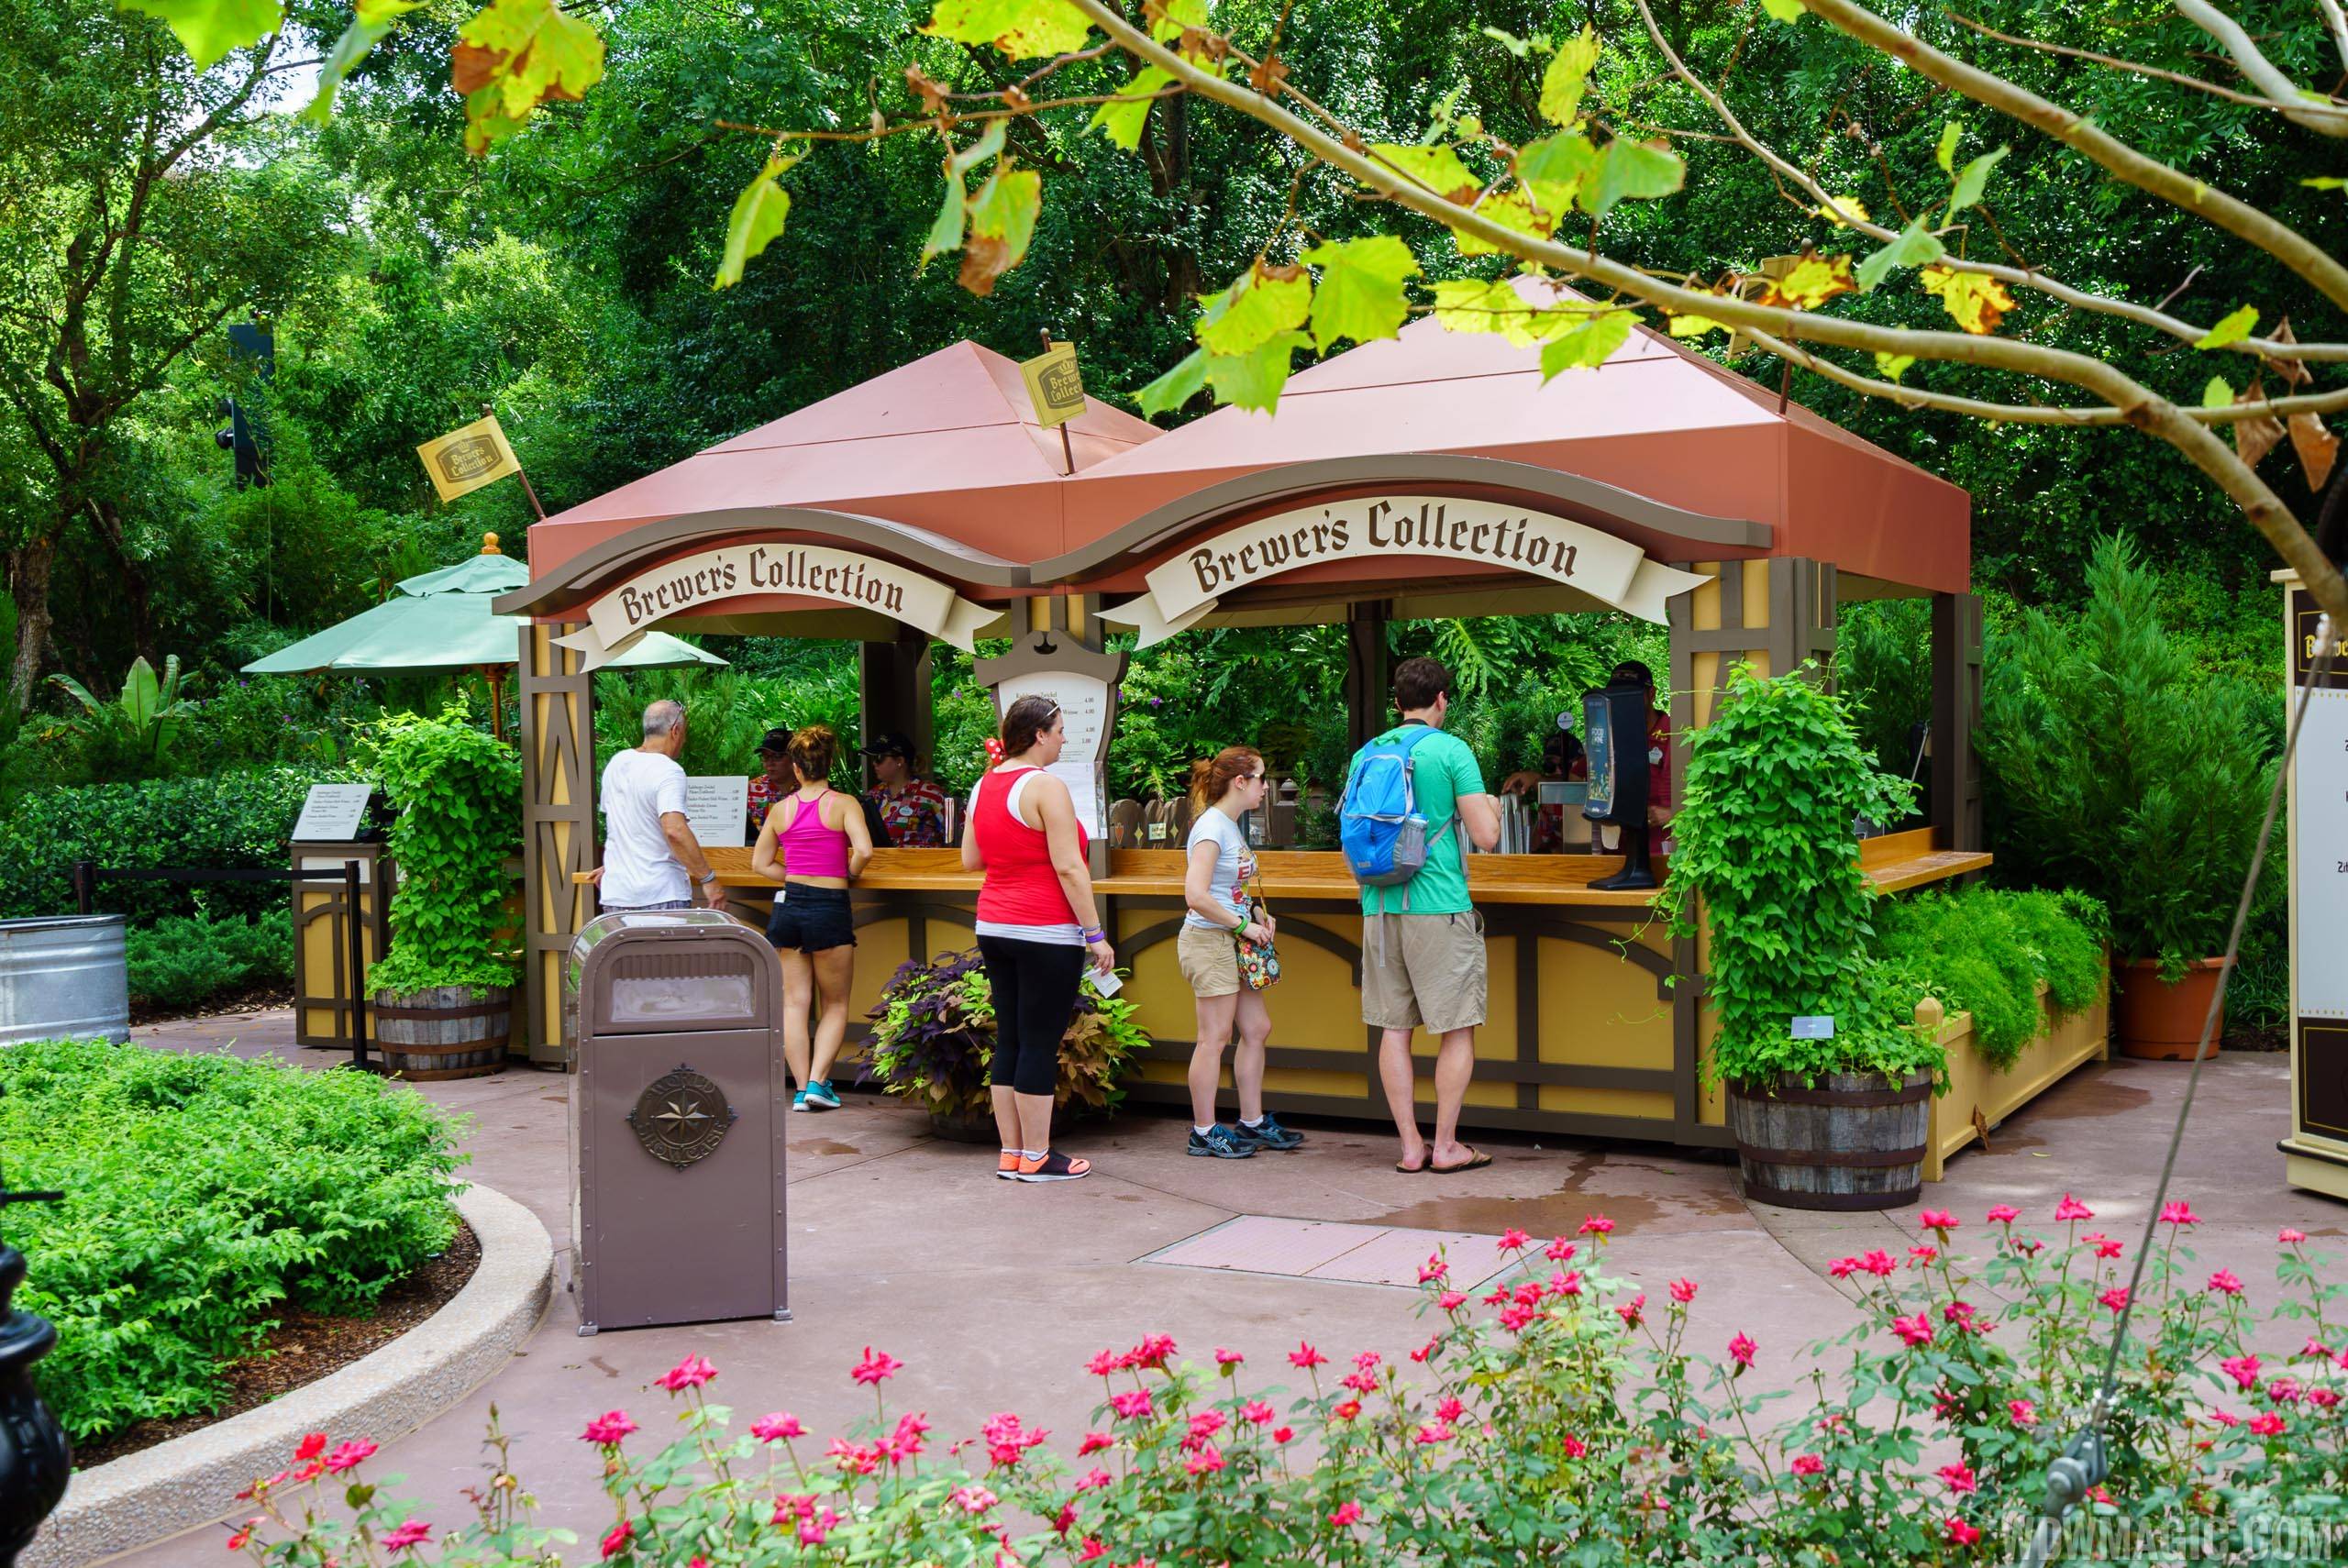 2016 Epcot Food and Wine Festival - Brewer's Collection kiosk